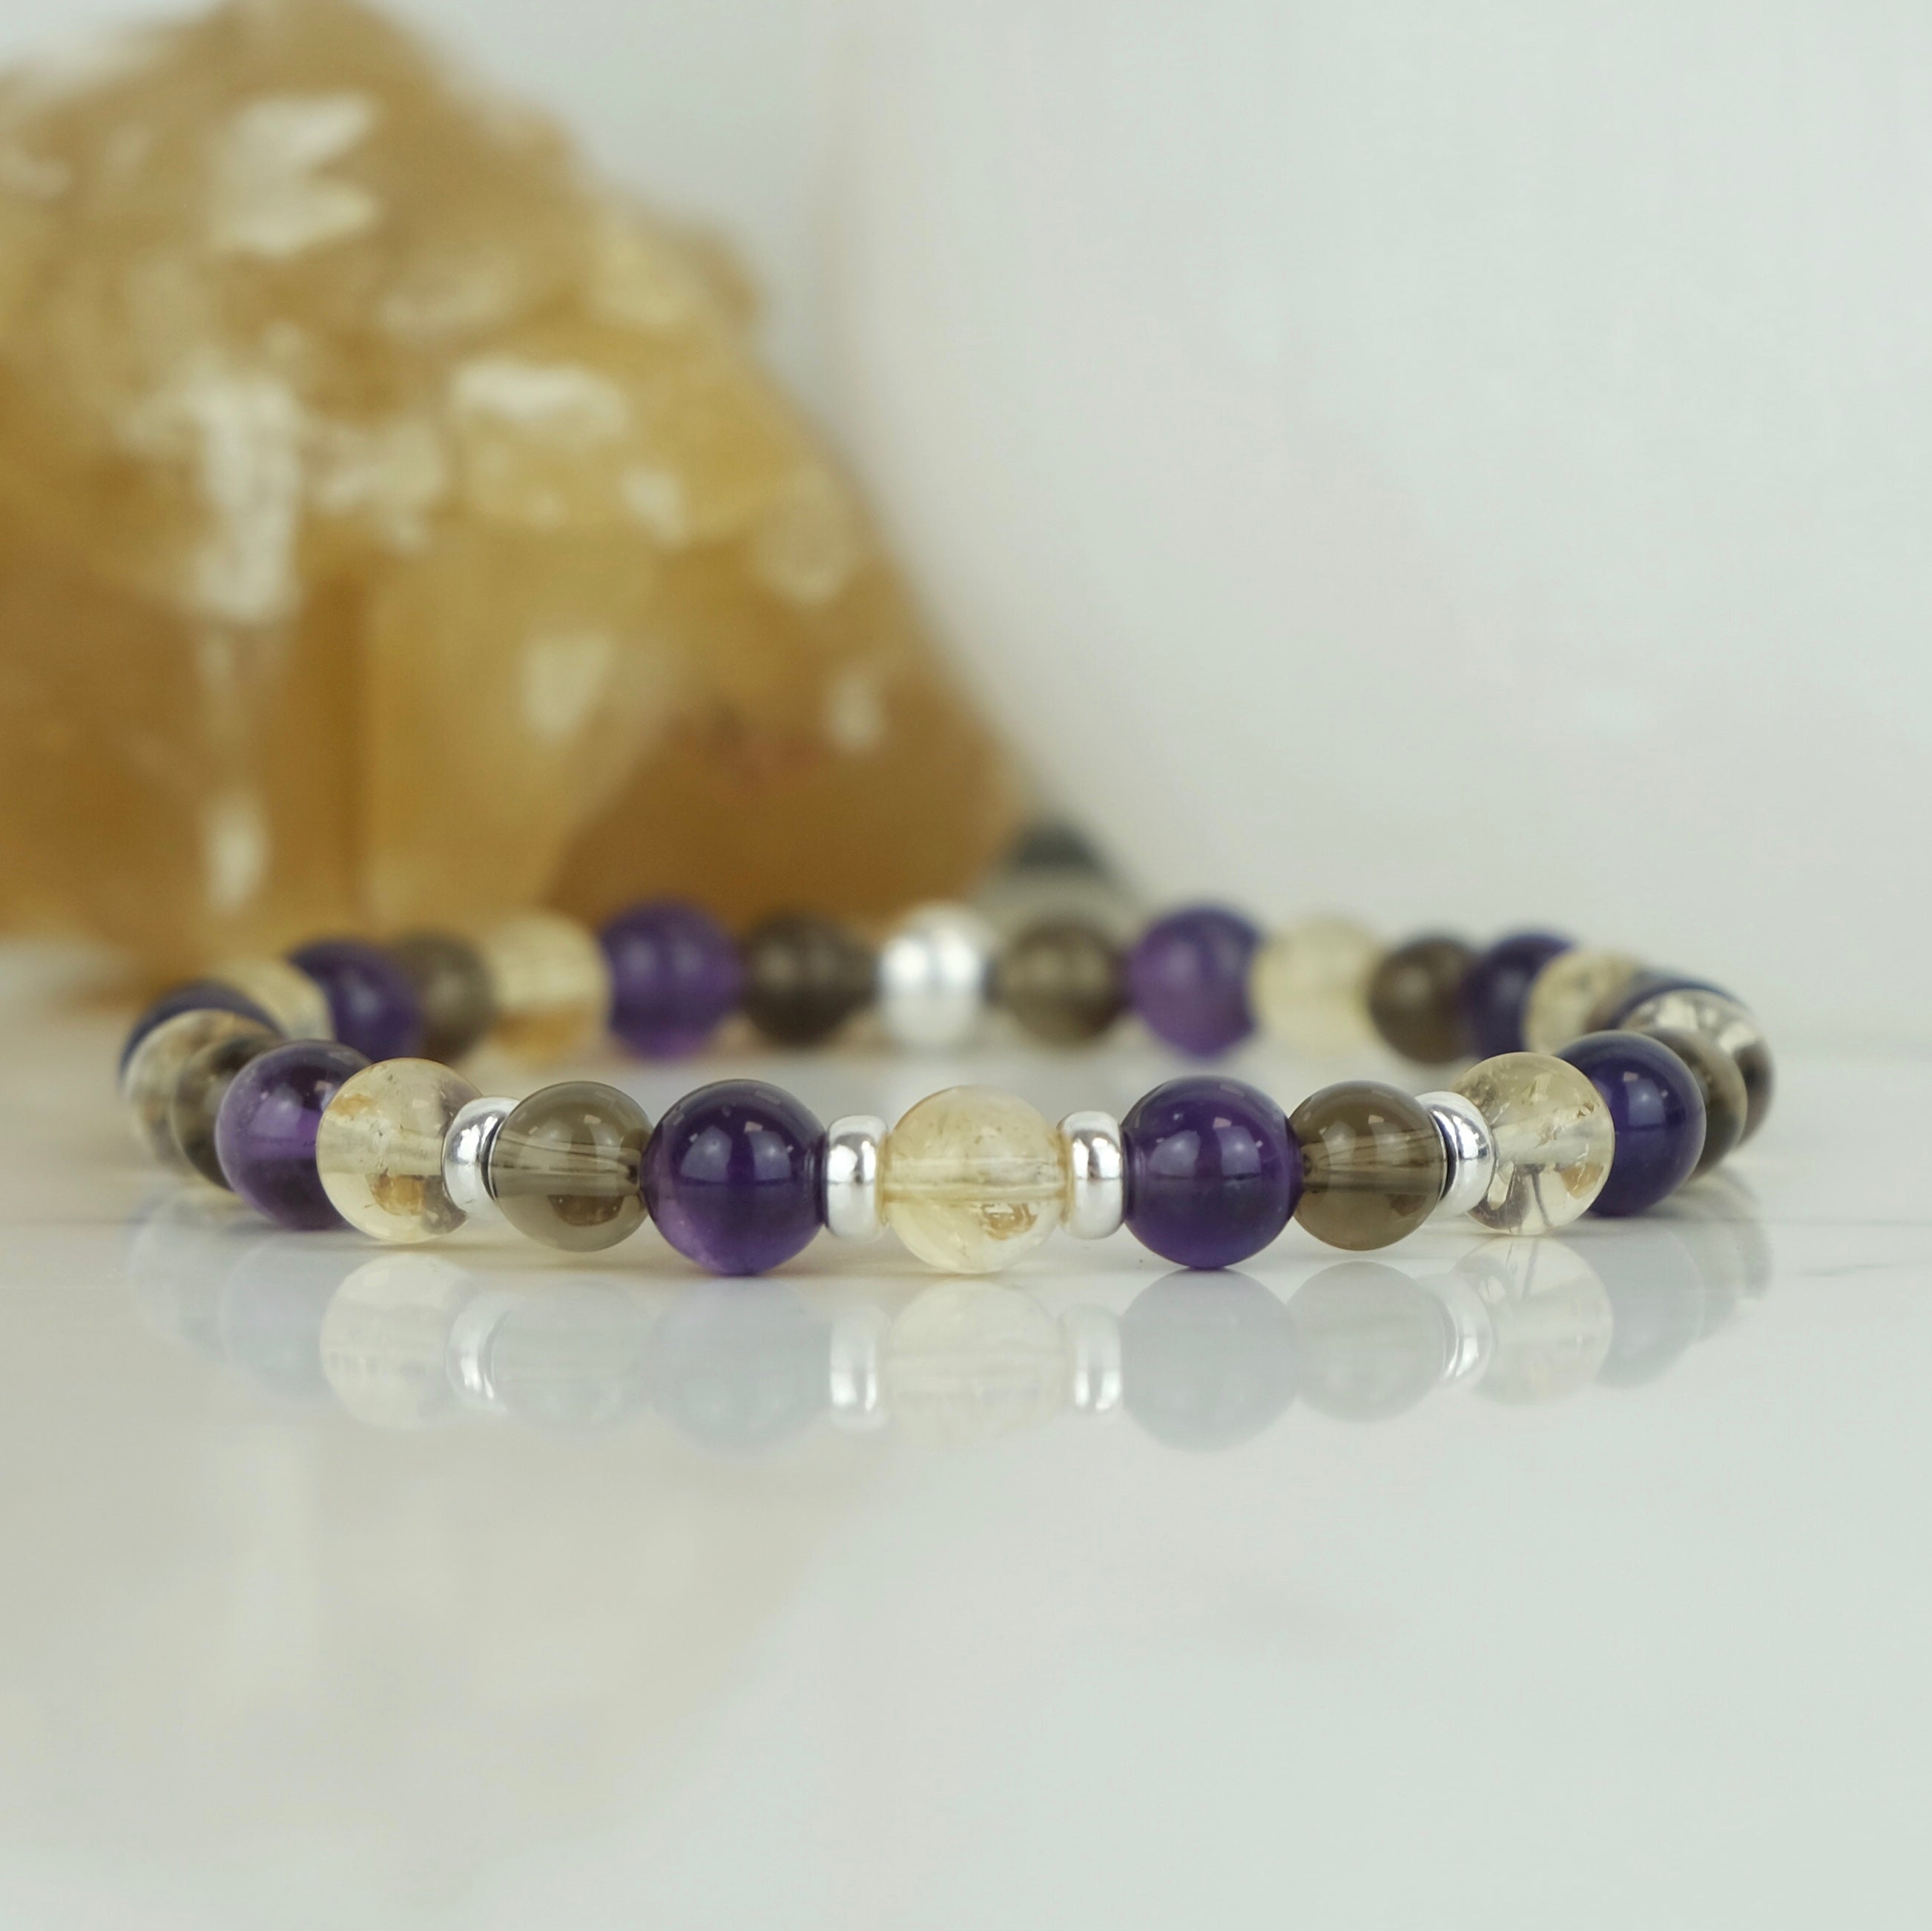 An Amethyst, citrine and smoky quartz gemstone bracelet in 6mm beads with silver accessories